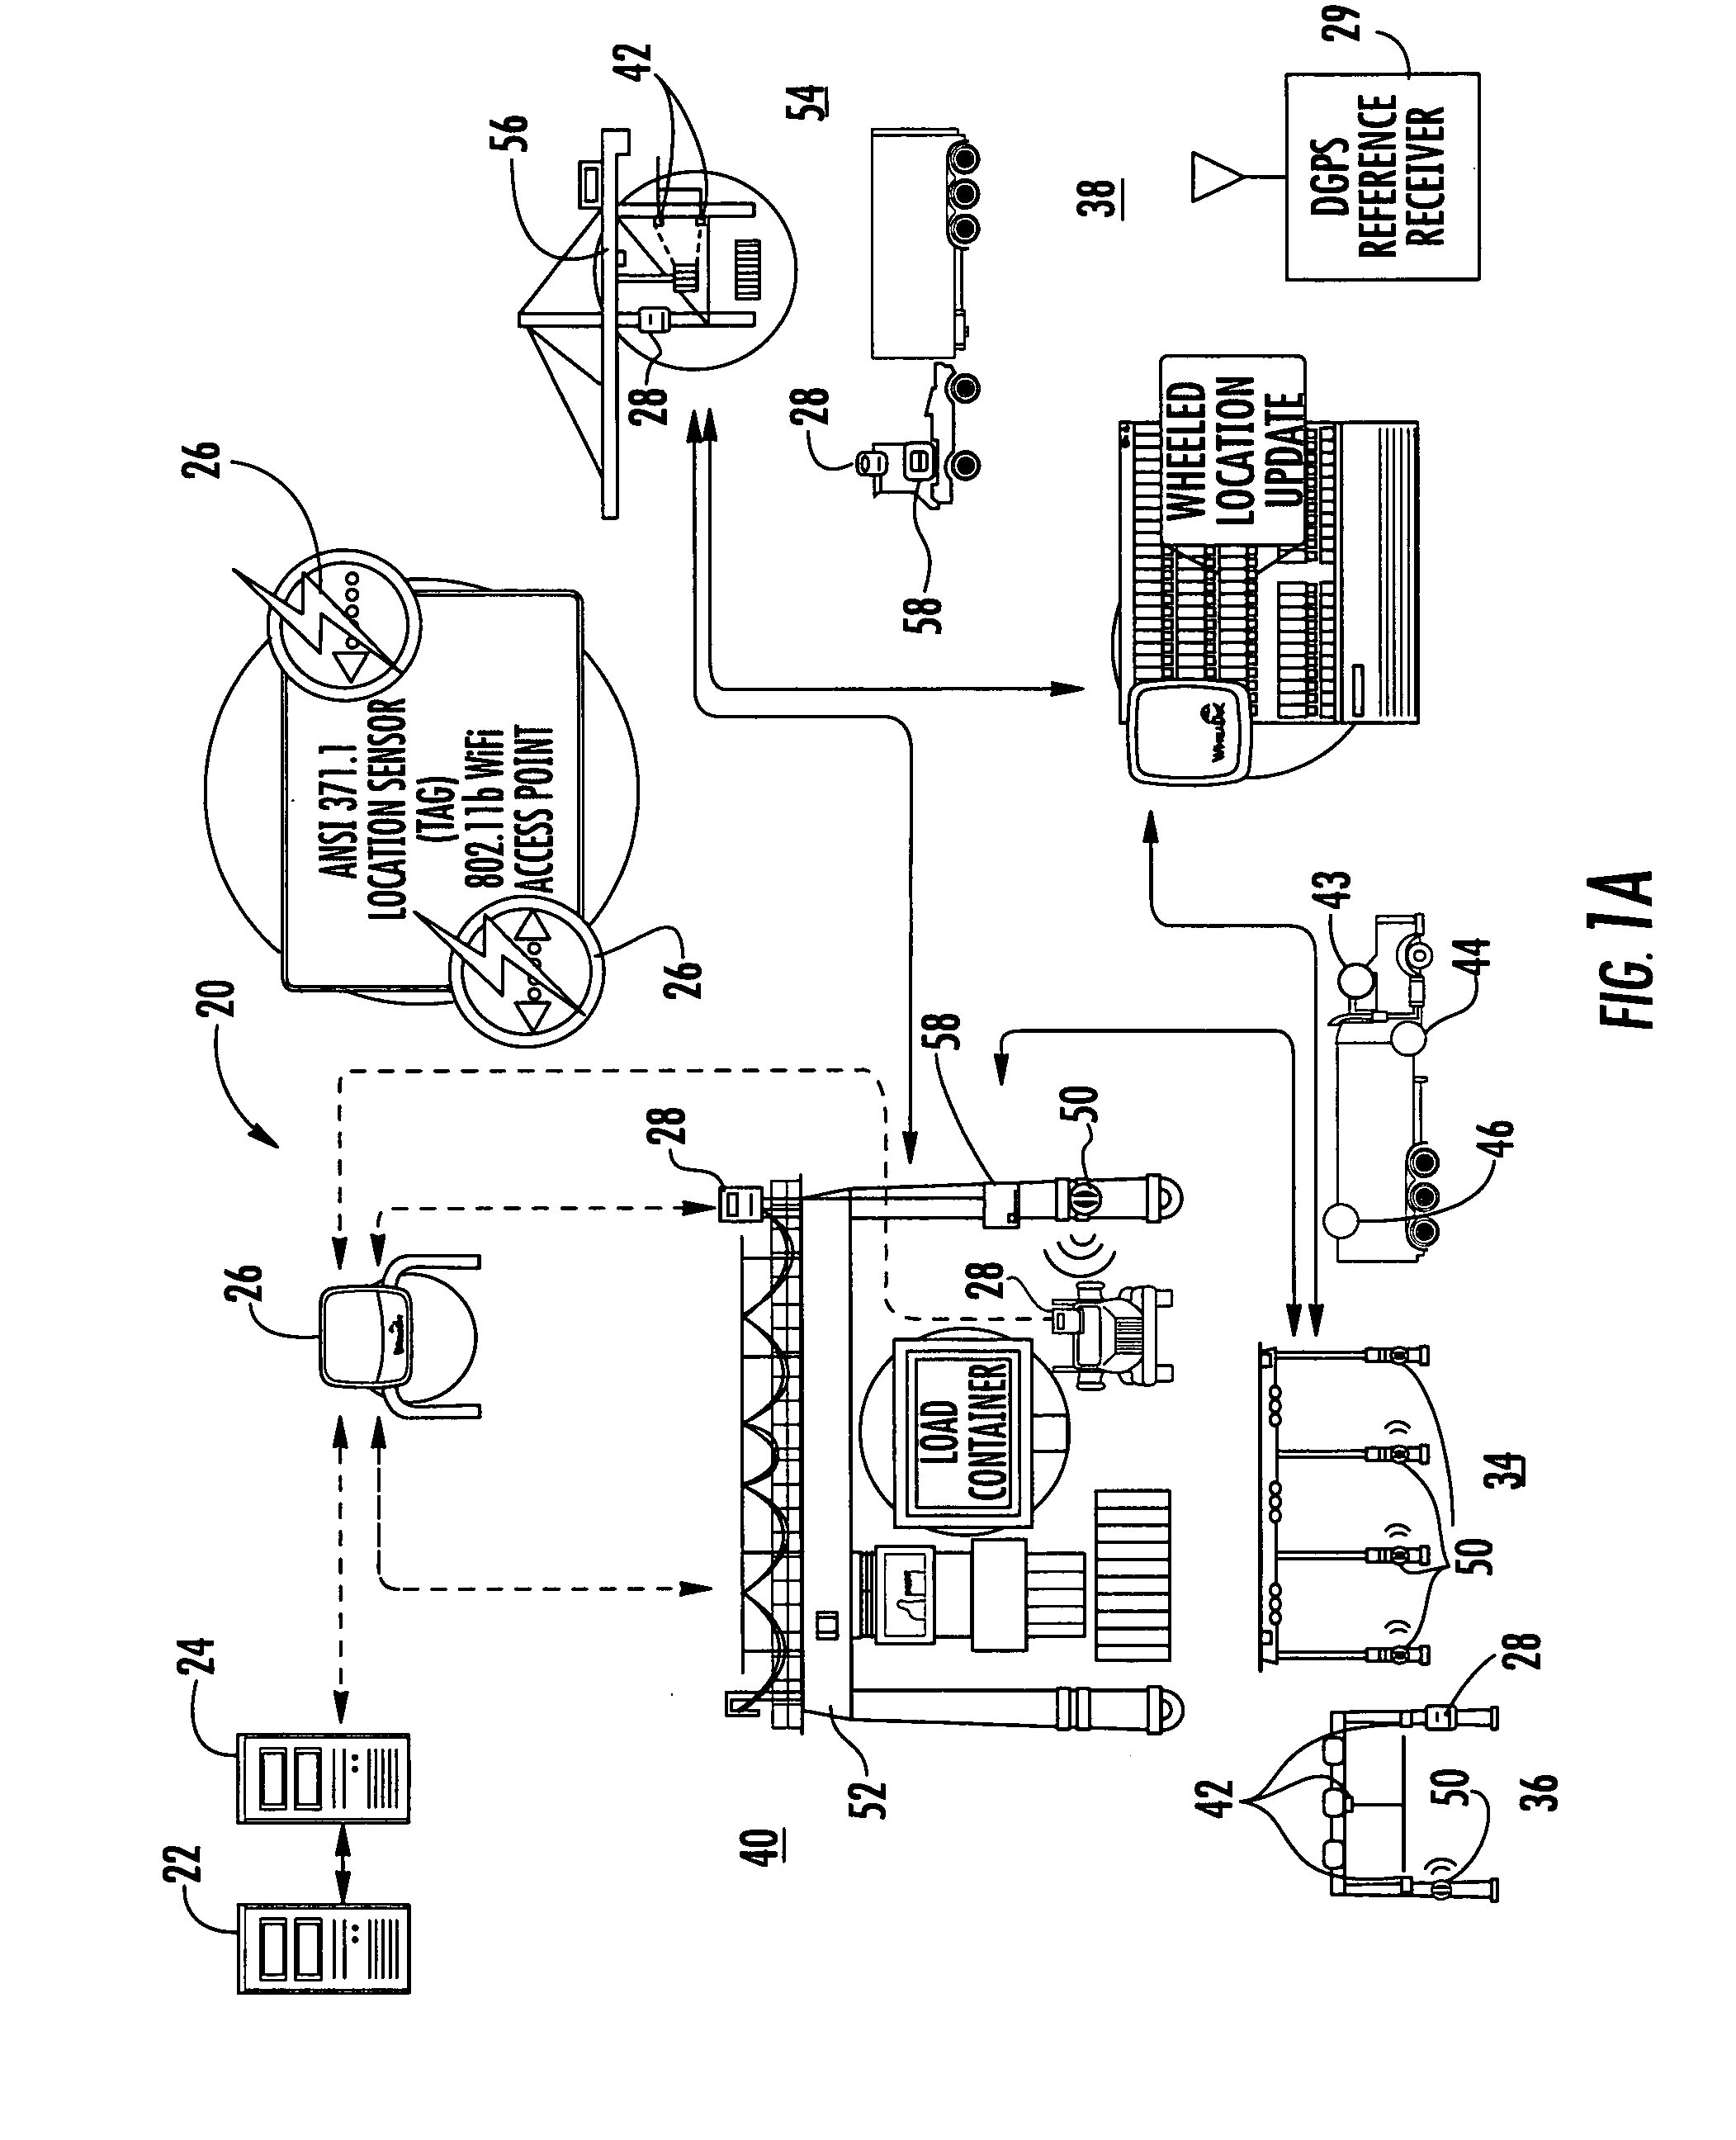 System and method for tracking vehicles and containers